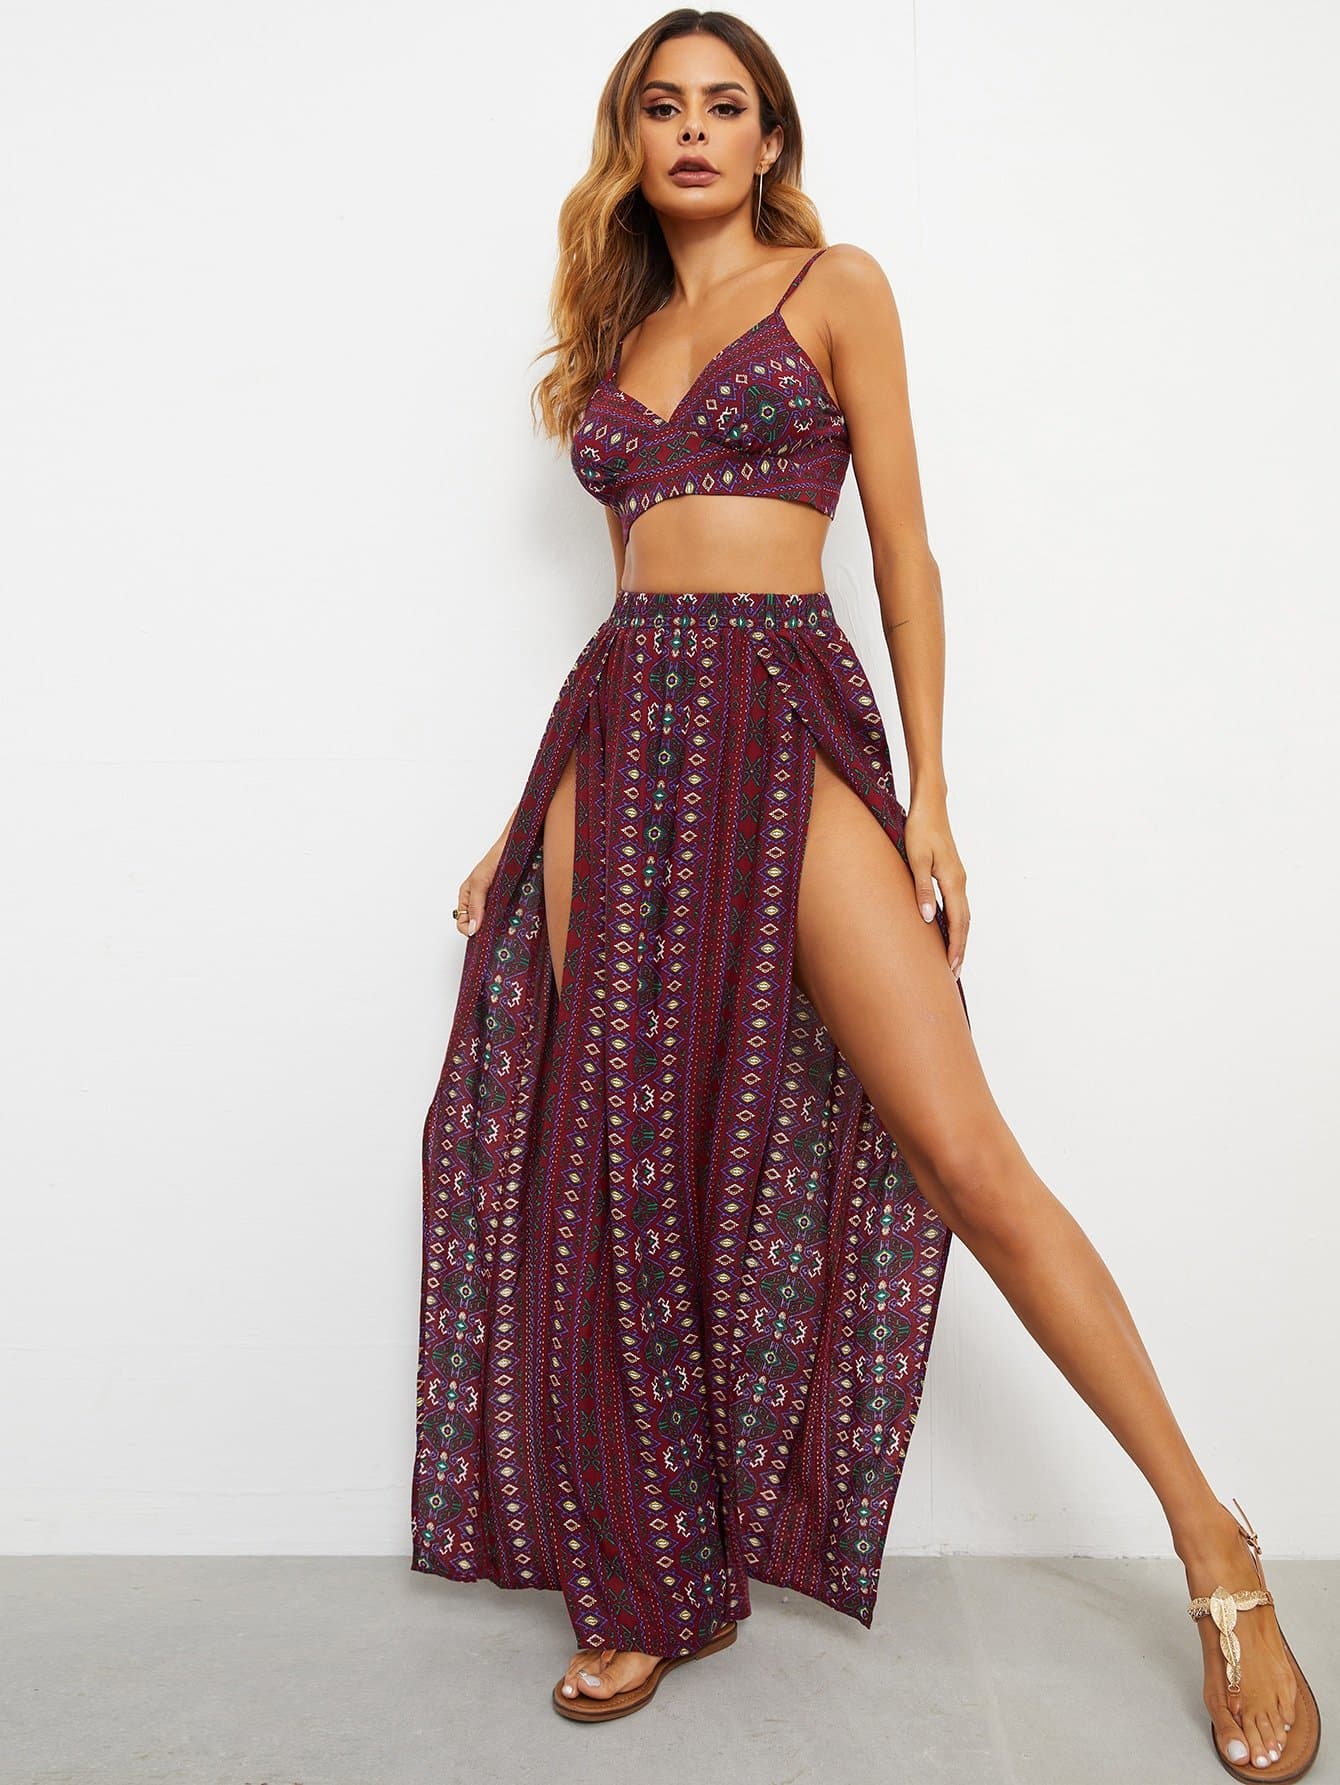 Tie Backless Spaghetti Strap Sleeveless Crop Cami Top and M-slit Thigh Skirt Set